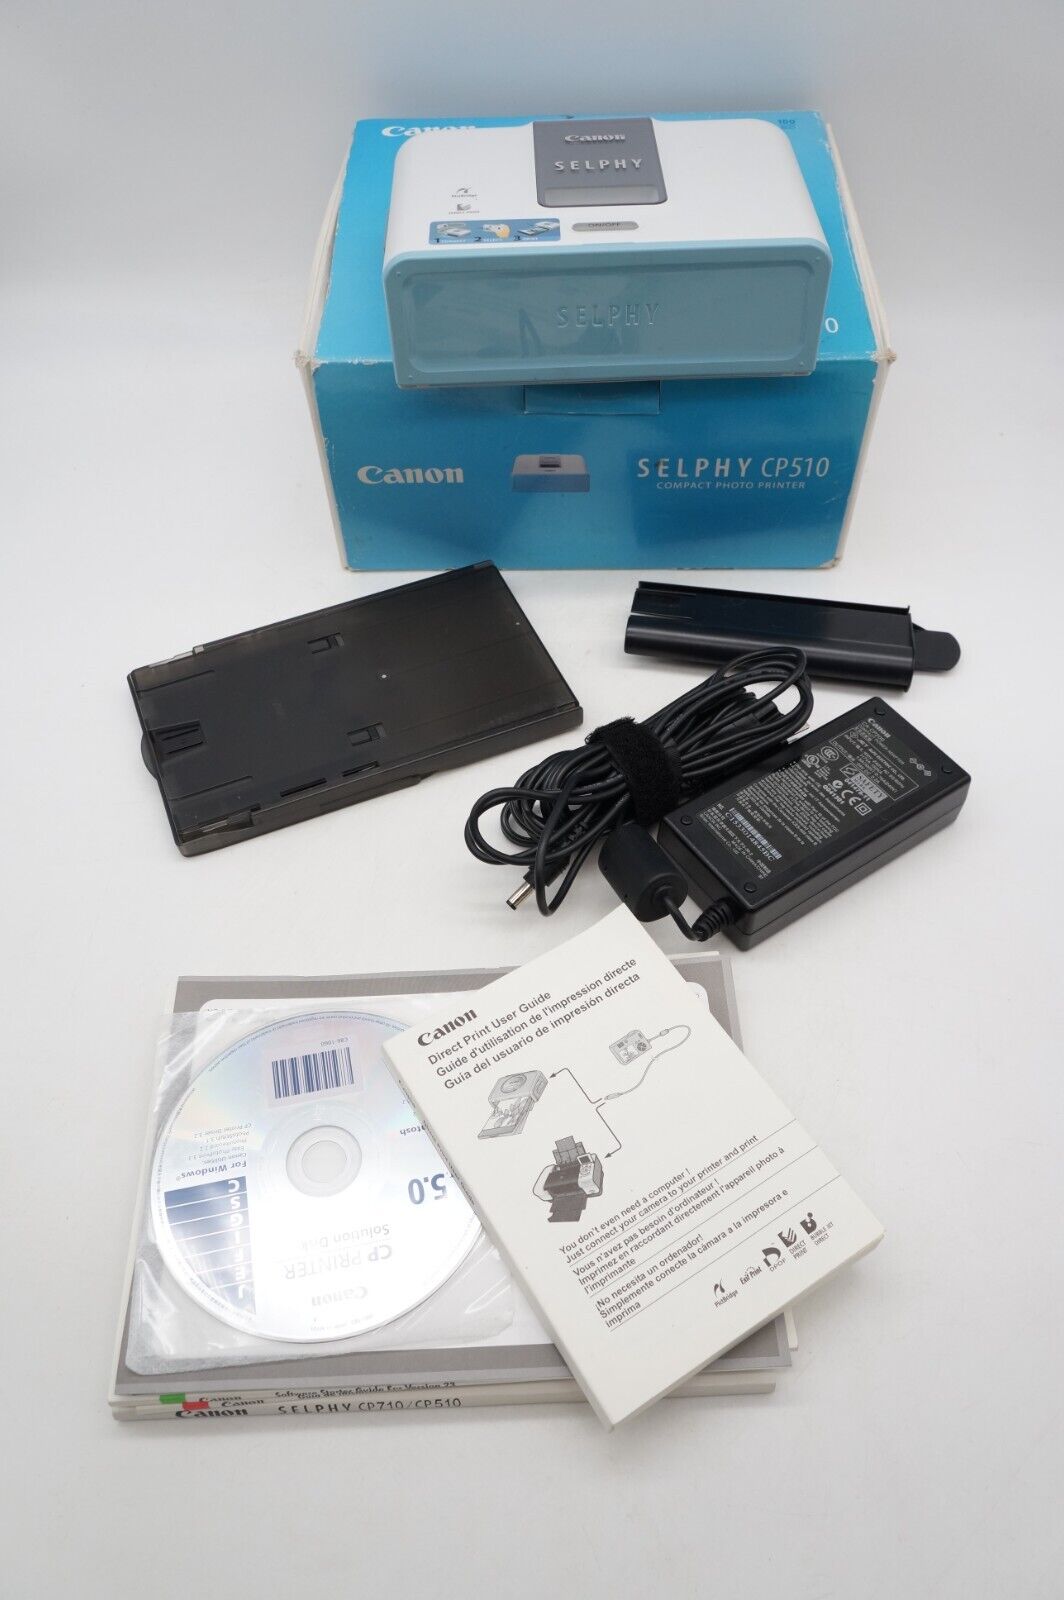 Canon SELPHY CP510 Digital Photo Thermal Printer